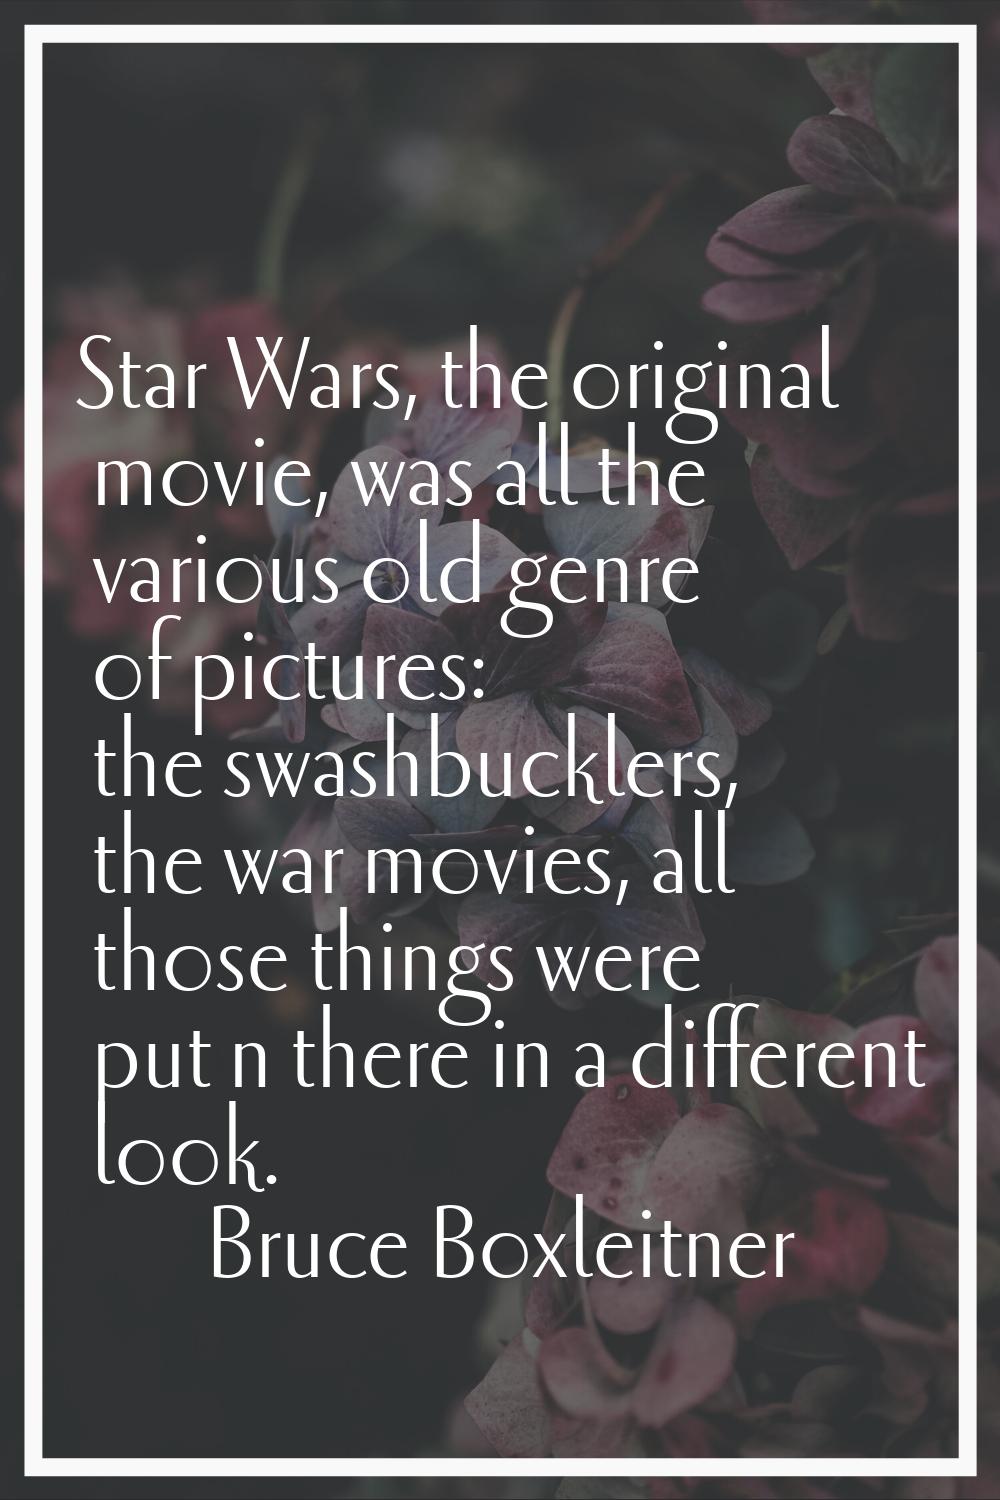 Star Wars, the original movie, was all the various old genre of pictures: the swashbucklers, the wa